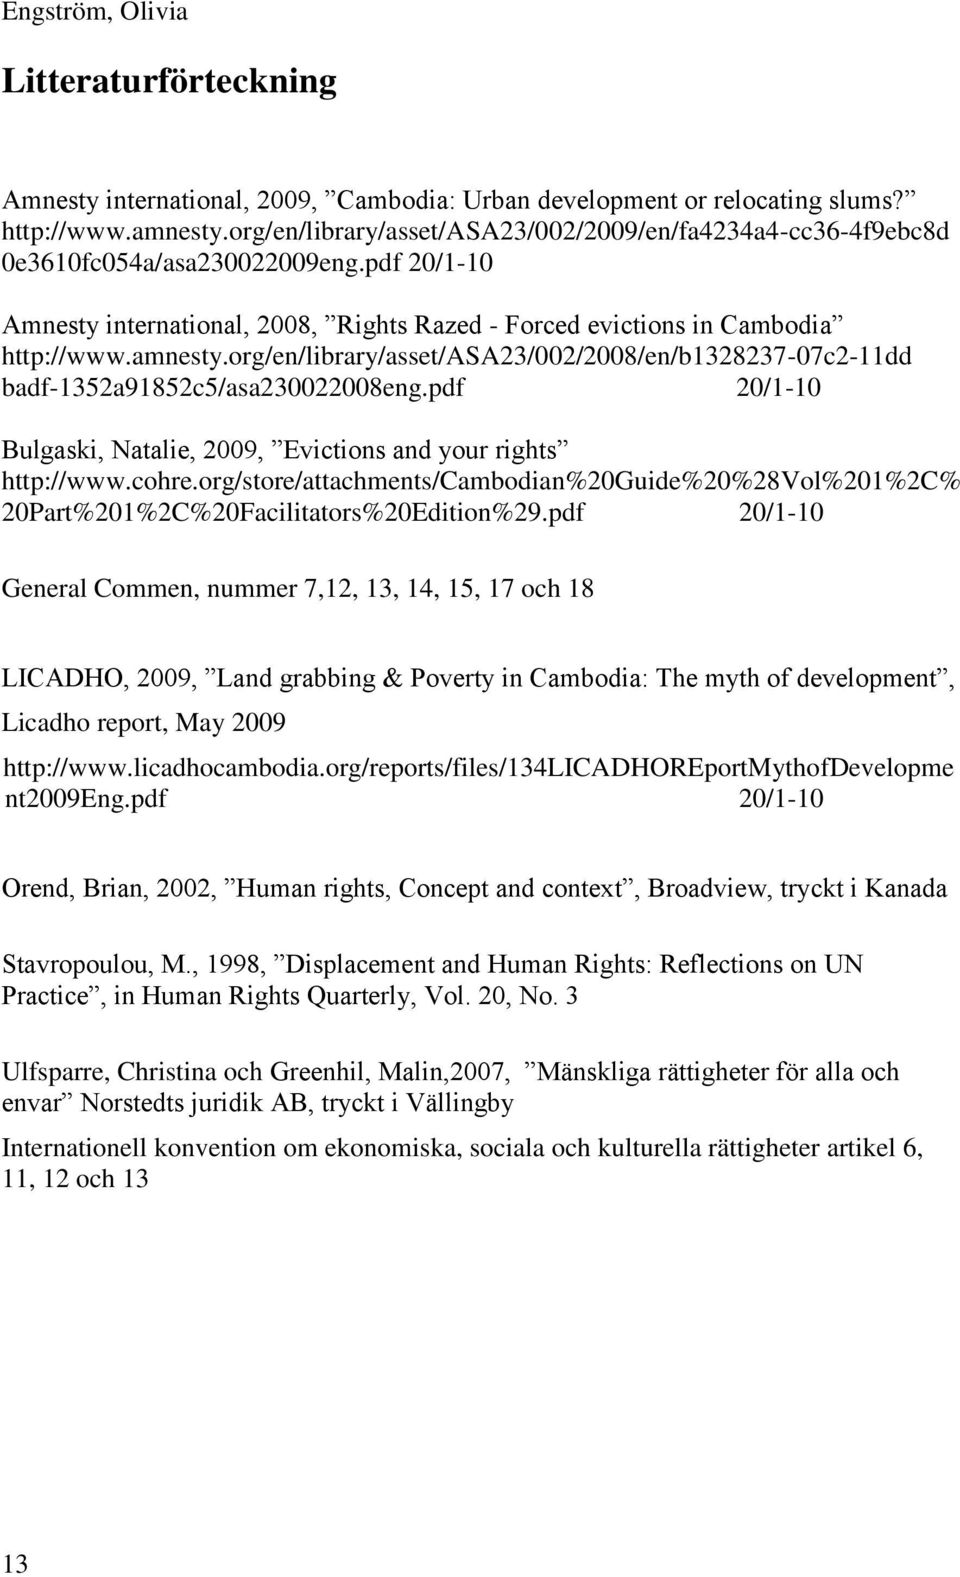 org/en/library/asset/asa23/002/2008/en/b1328237-07c2-11dd badf-1352a91852c5/asa230022008eng.pdf 20/1-10 Bulgaski, Natalie, 2009, Evictions and your rights http://www.cohre.